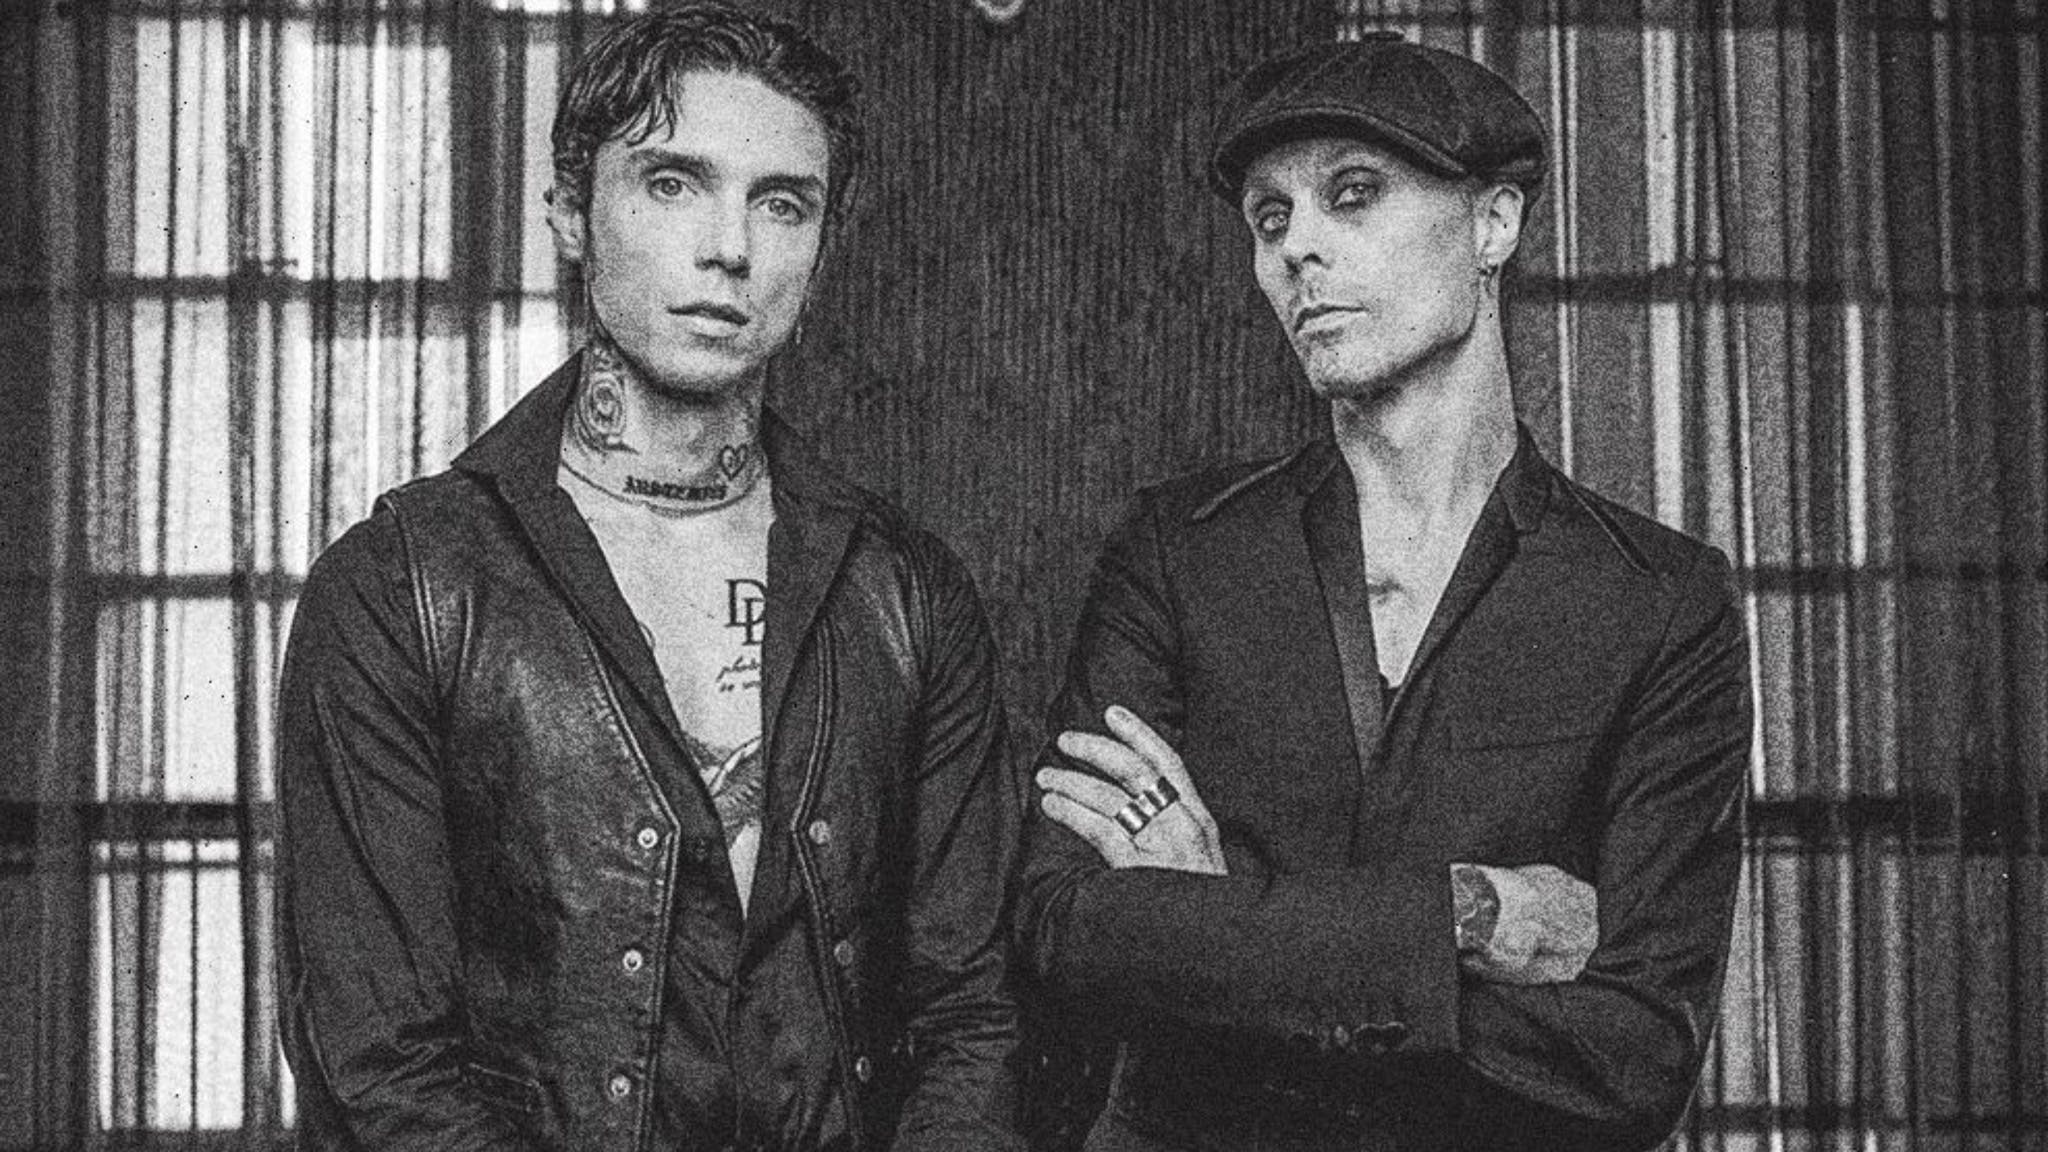 Black Veil Brides are teasing a song with Ville Valo